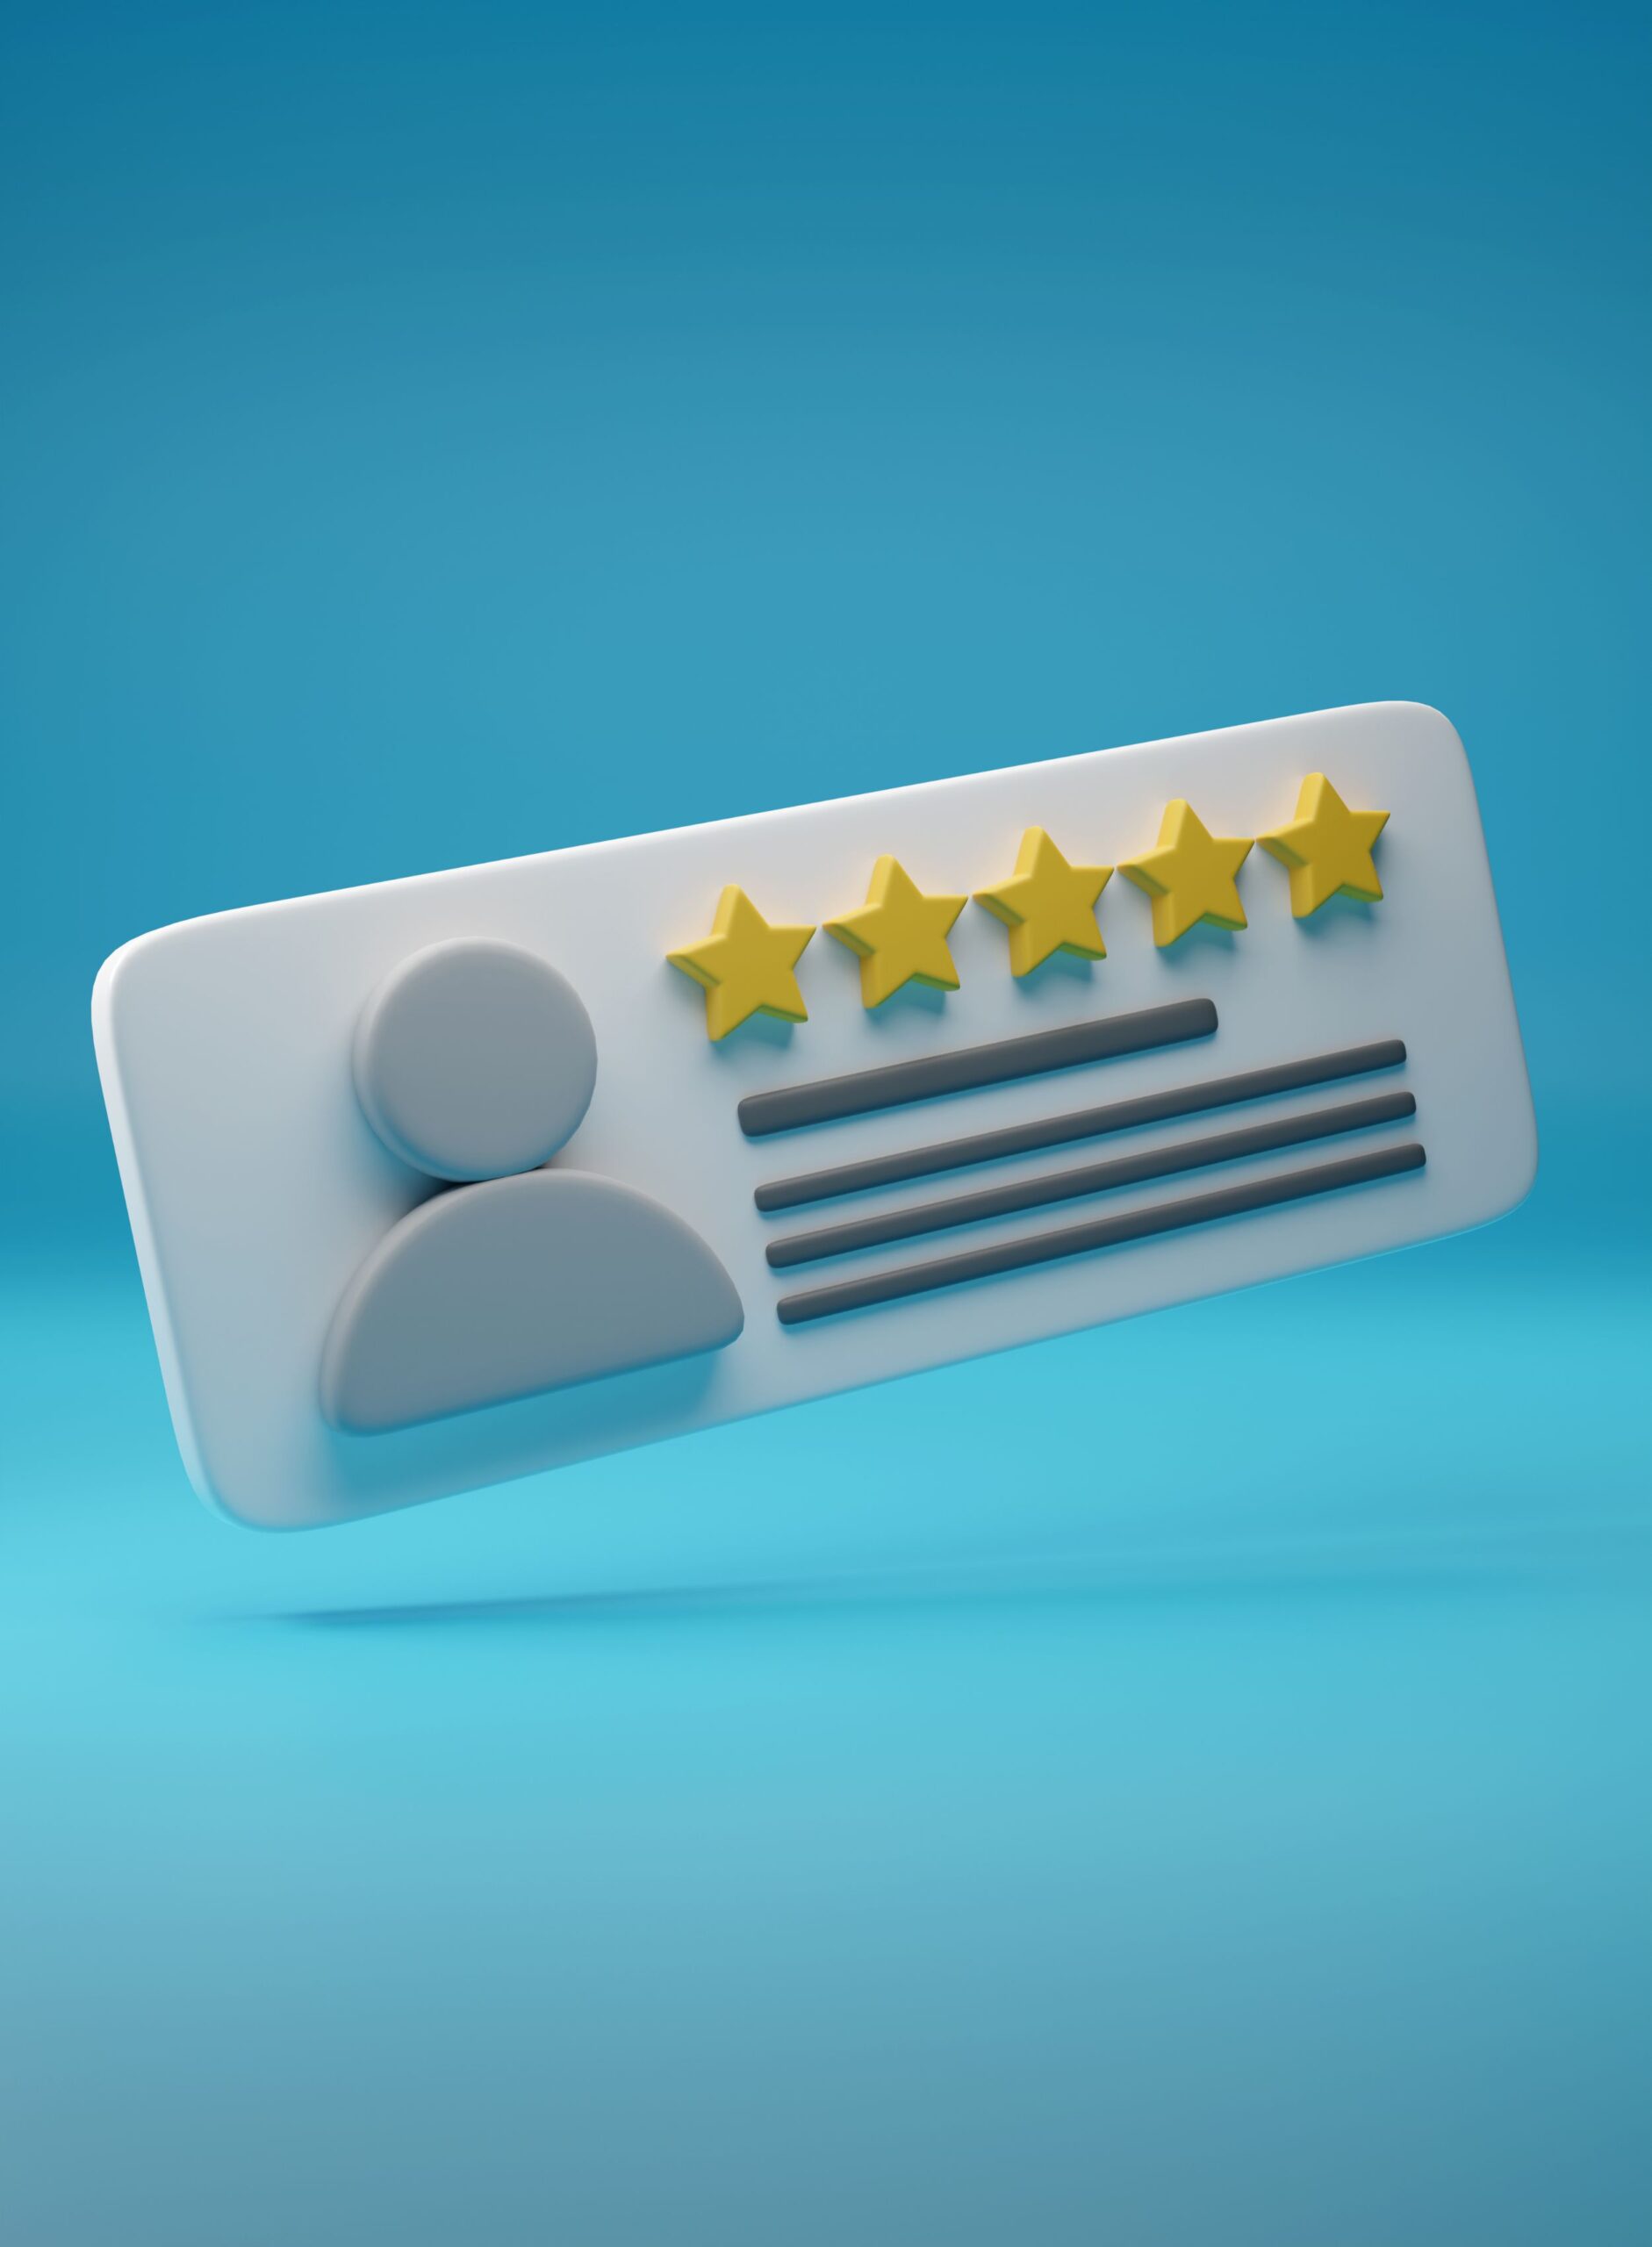 Image of a 5-star review showcasing customer satisfaction.